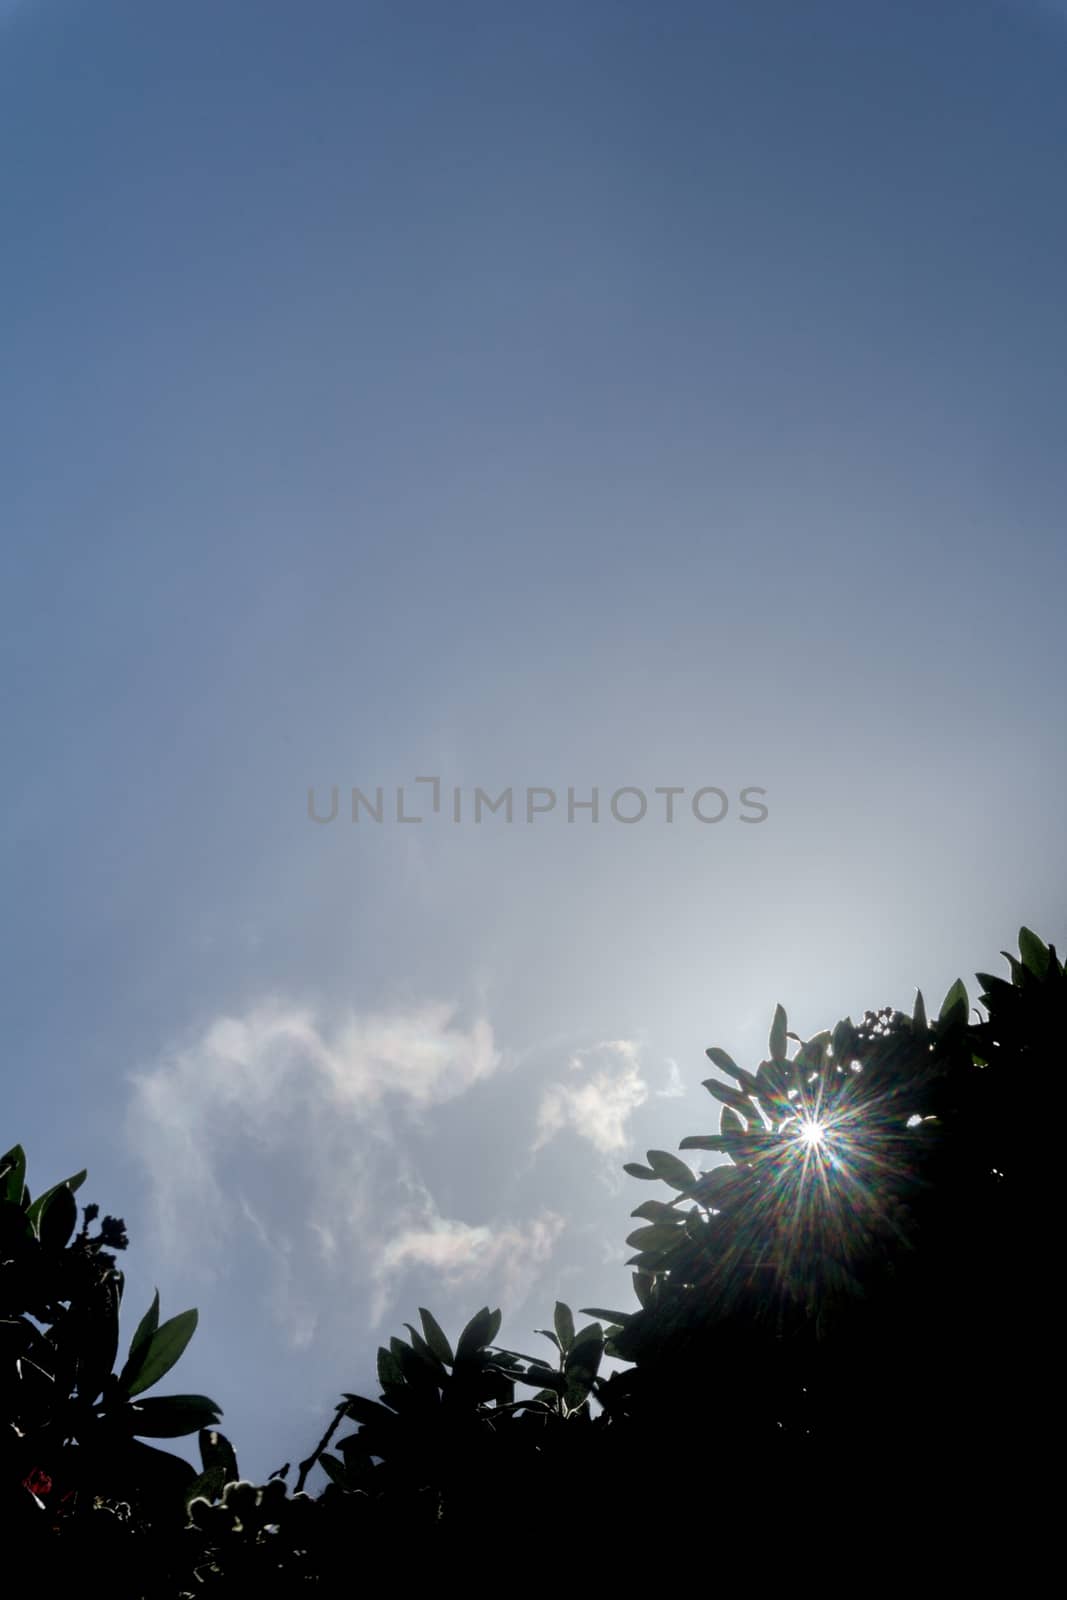 Lens flare through tree silhouette against blue sky by brians101